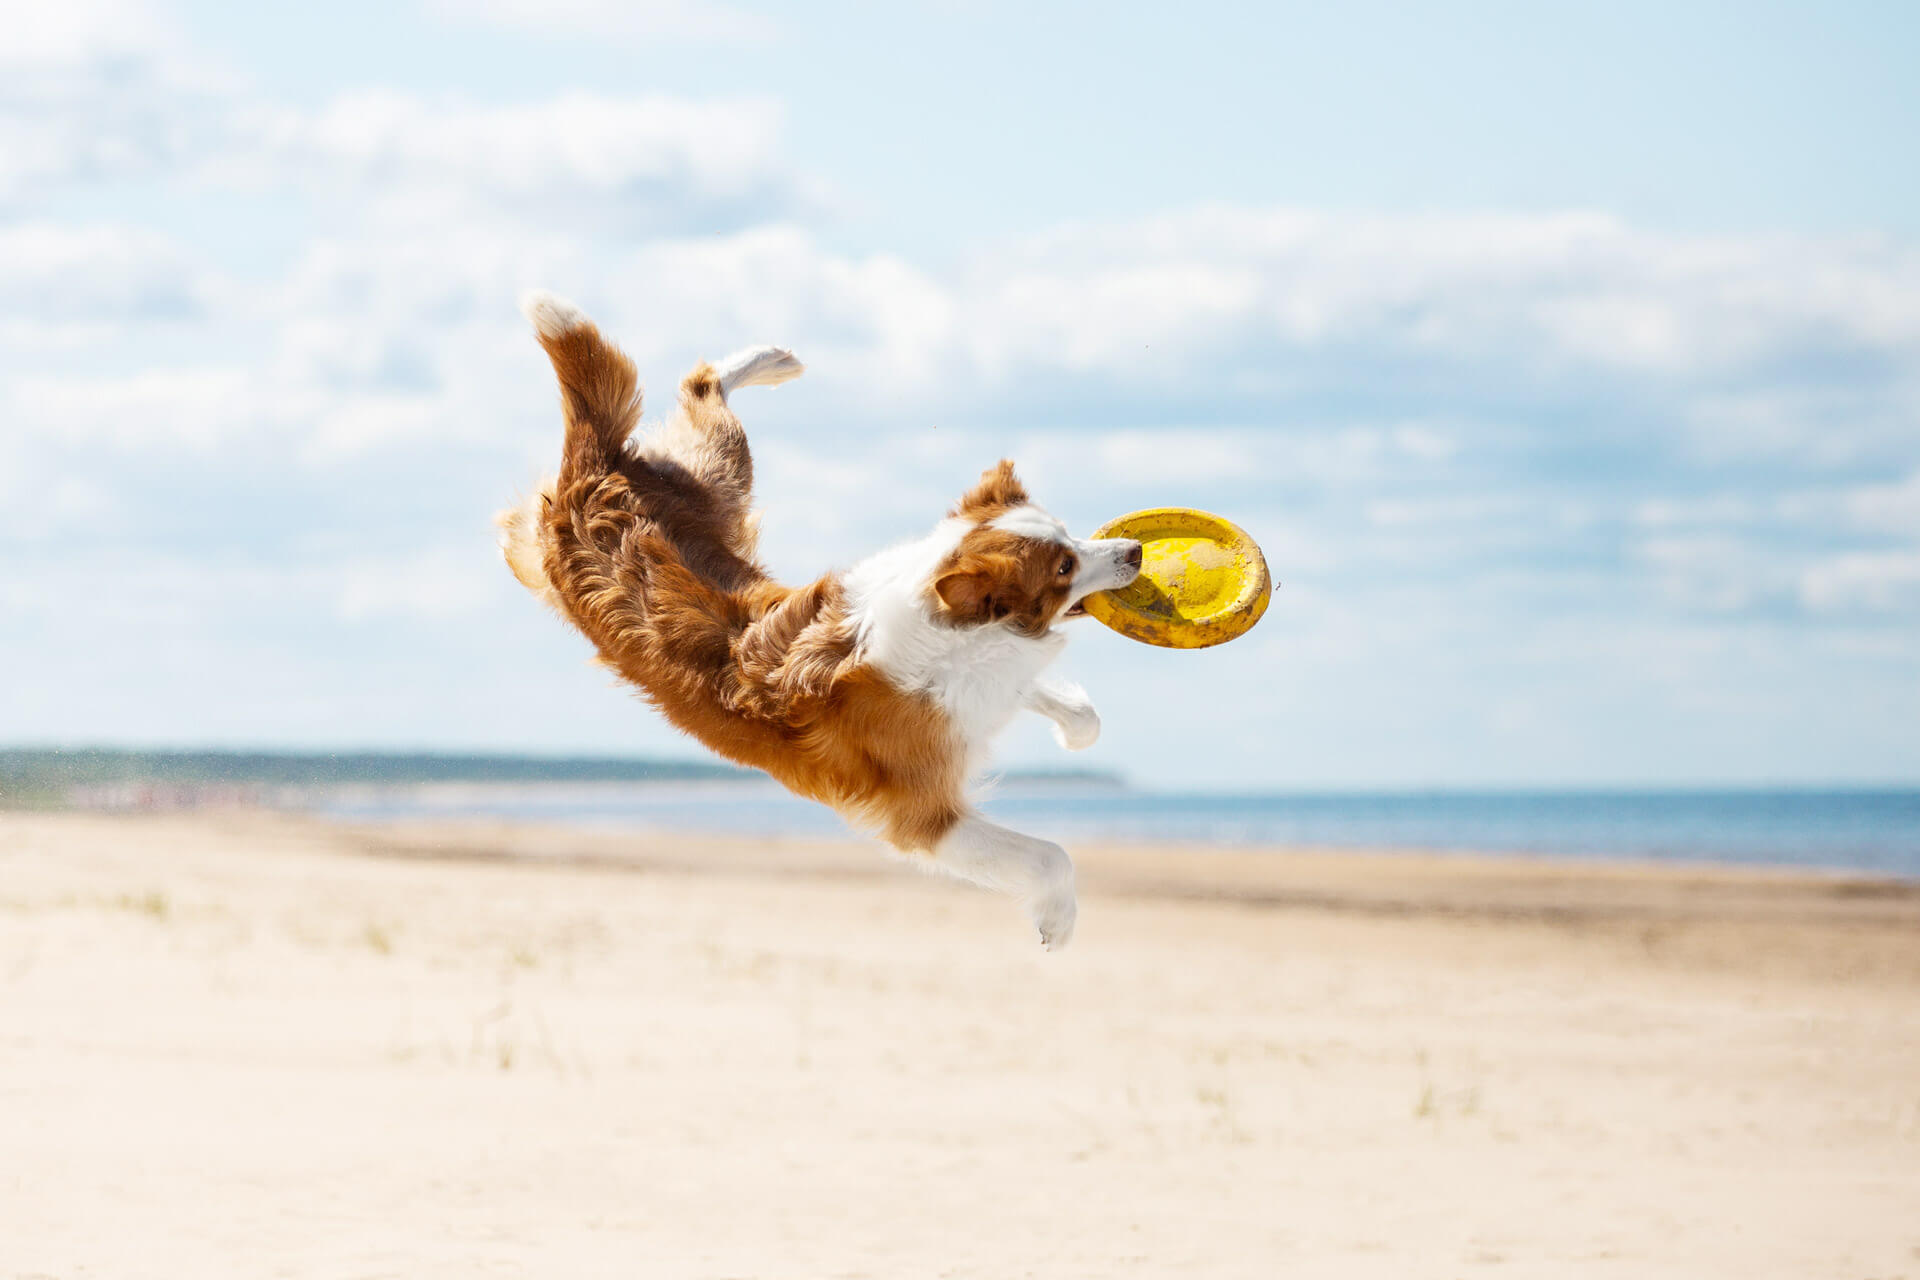 dog catching yellow frisbee mid-air at the beach